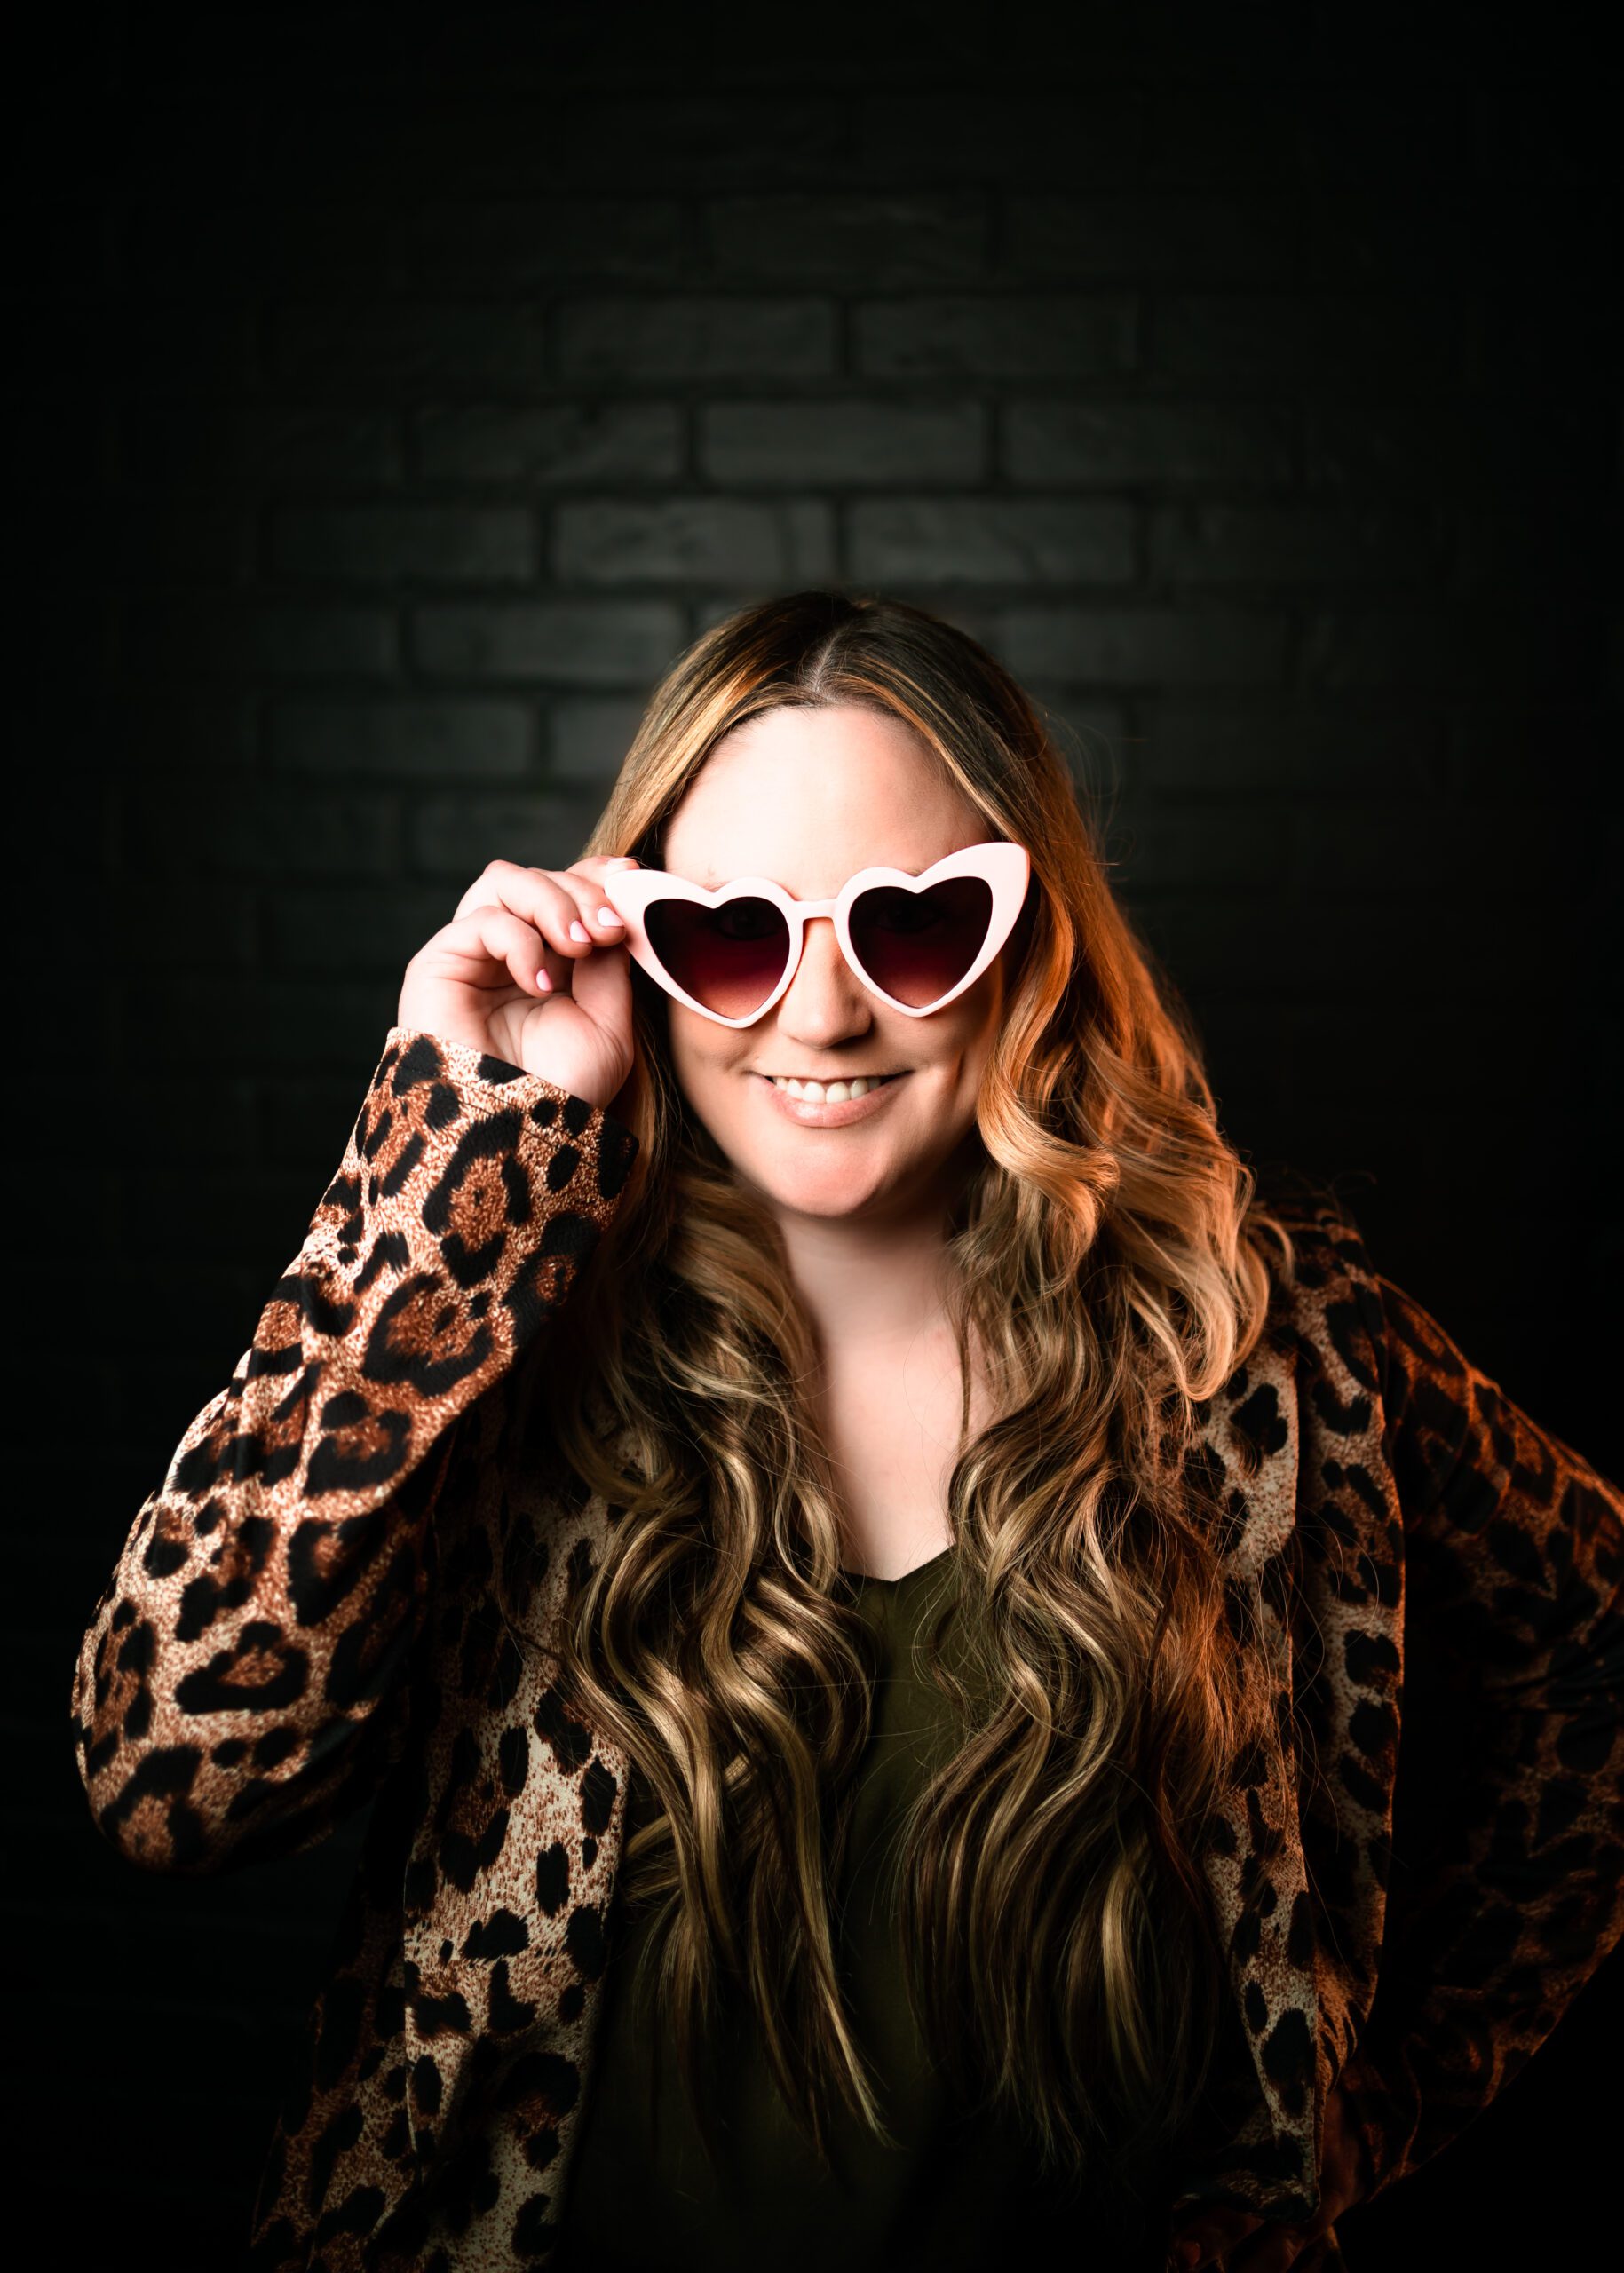 professional headshot of woman with blonde hair smiling and wearing pink heart sunglasses against black backdrop